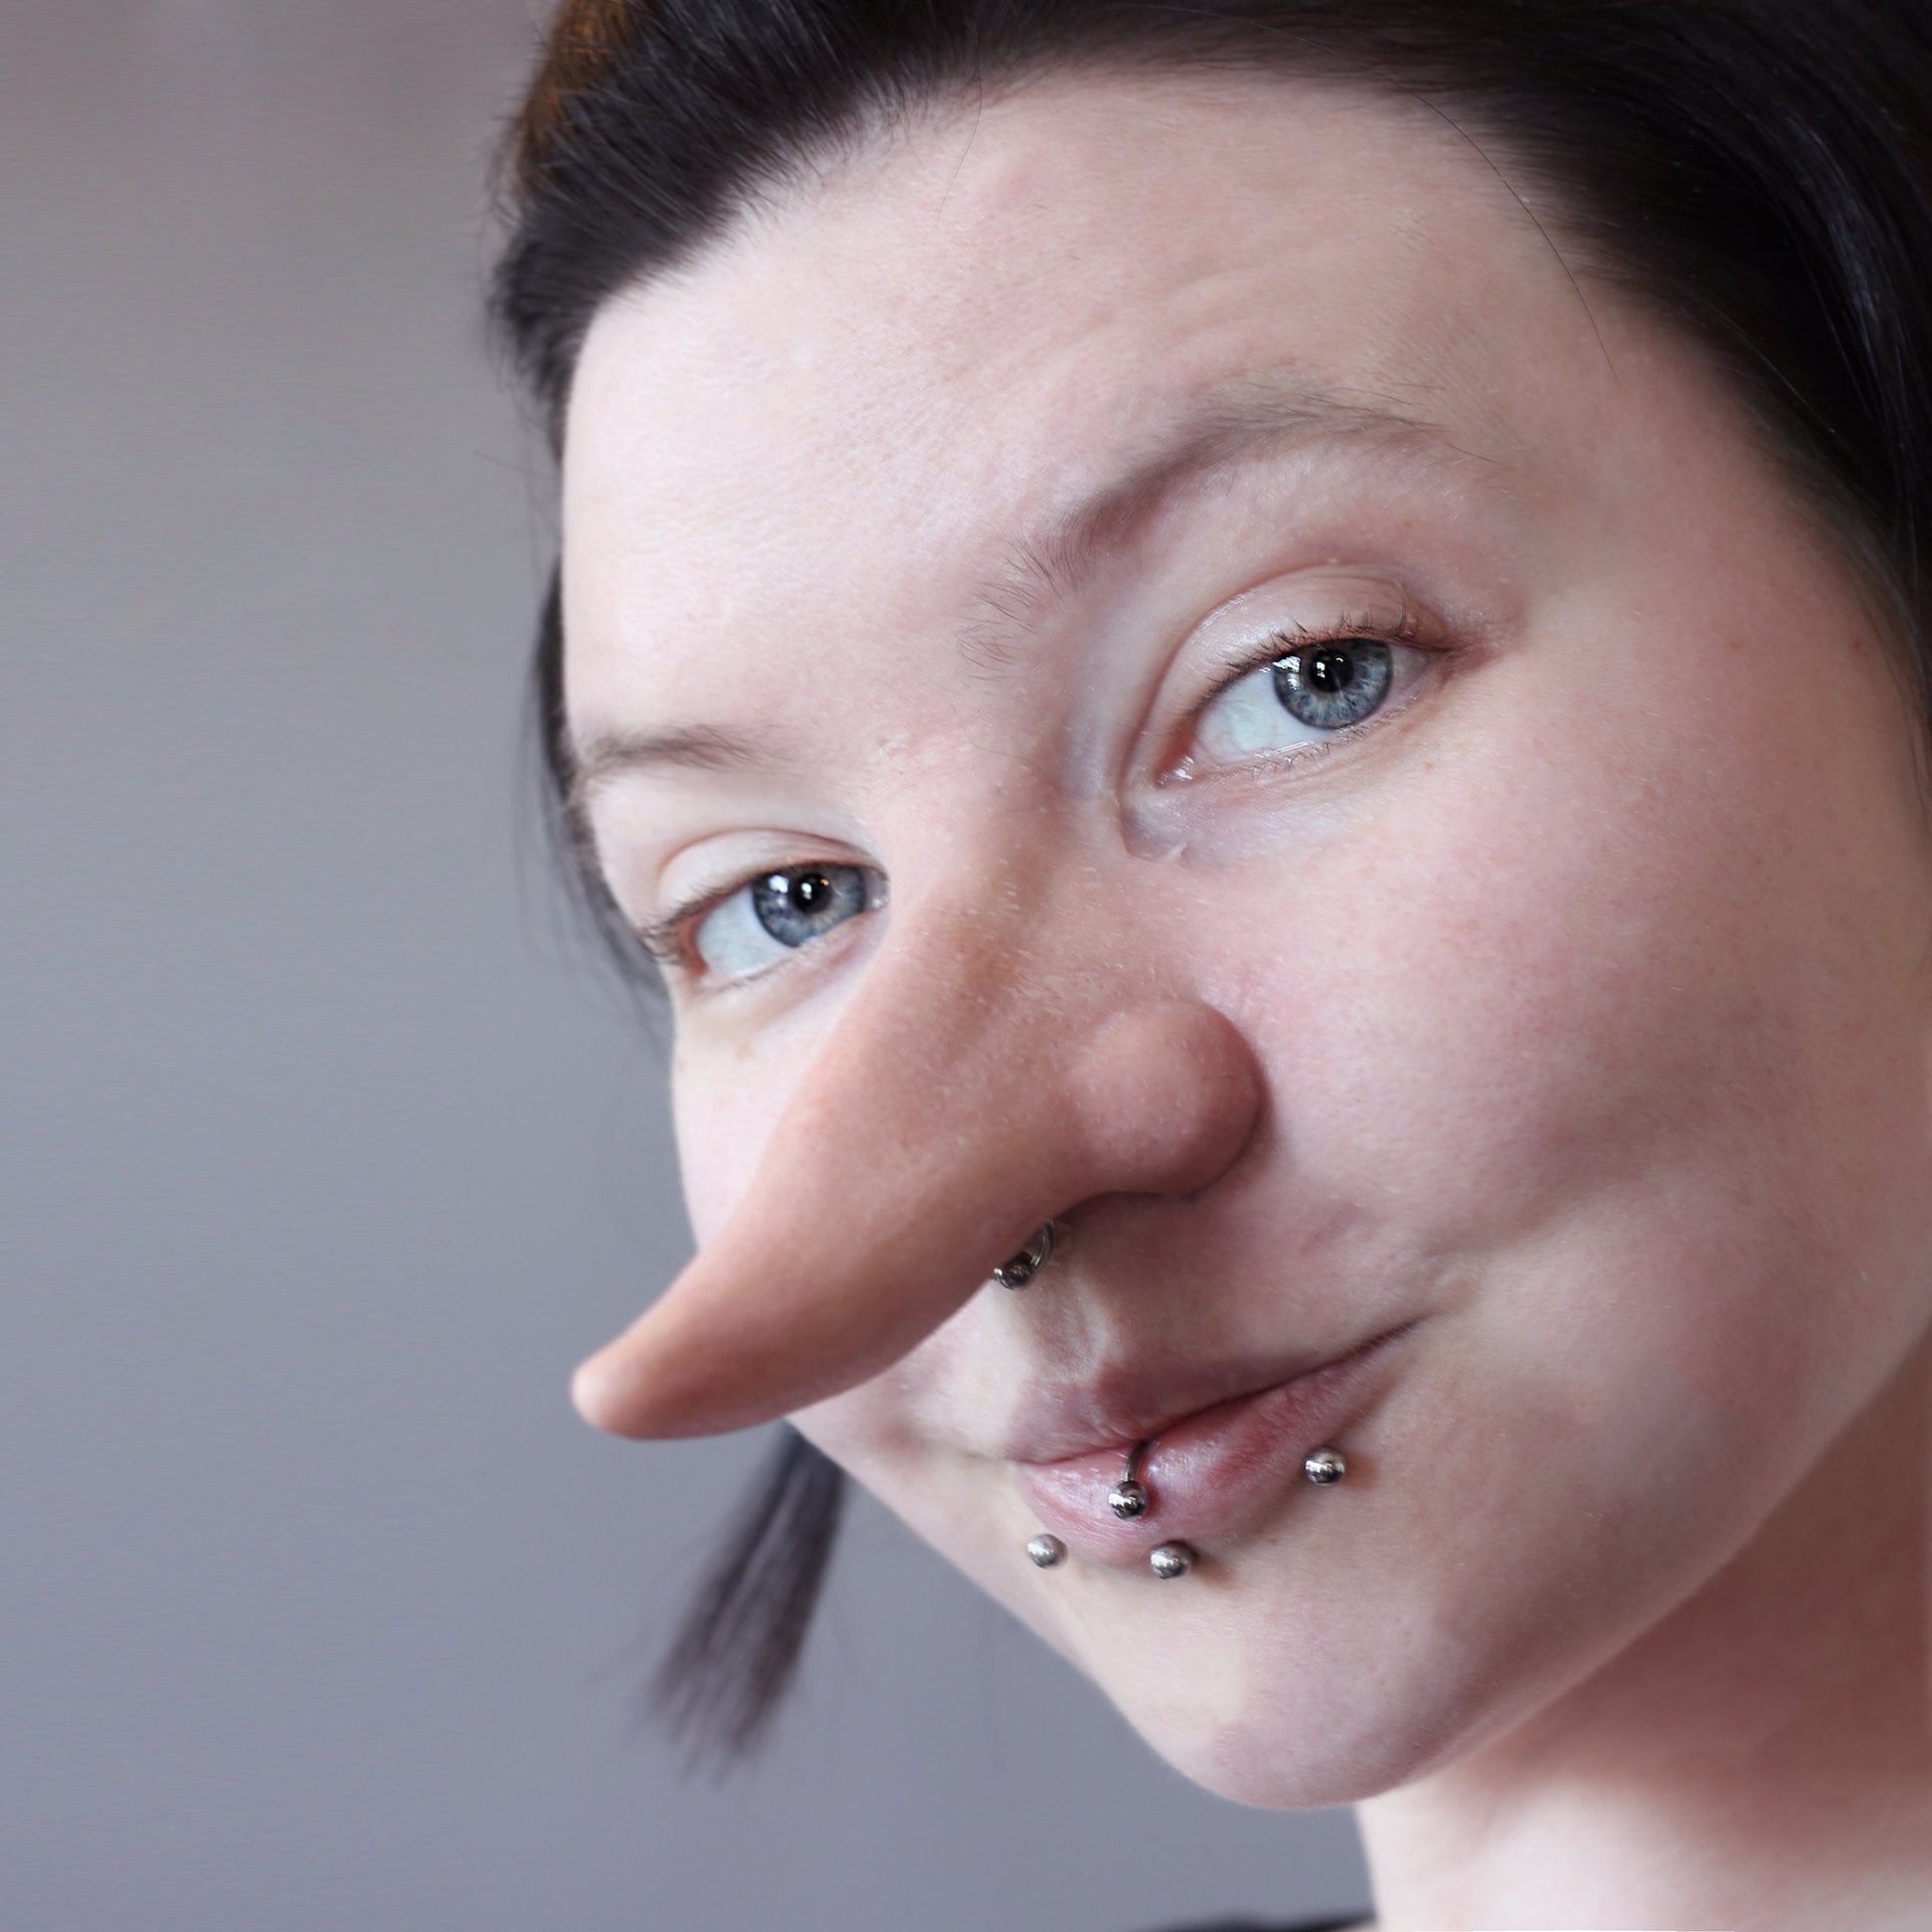 Woman with dark hair wearing a long nose prosthetic